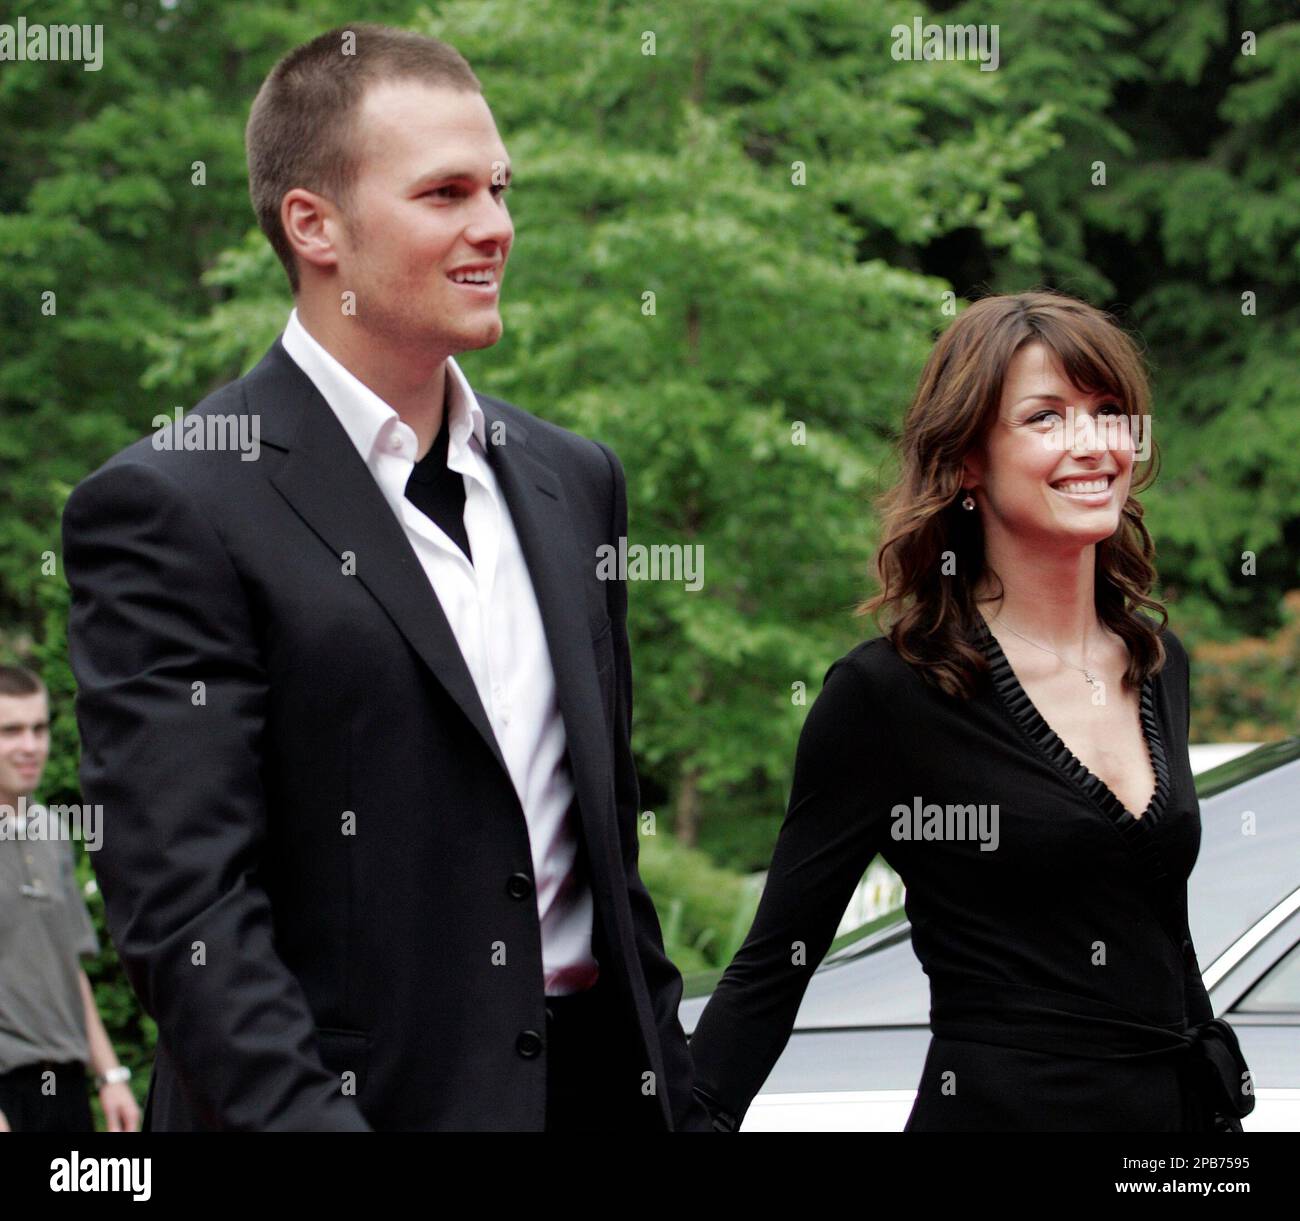 **FILE** New England Patriots quarterback Tom Brady, left, is shown in this June 12, 2005, file photo arriving with his former girlfriend, actress Bridget Moynahan, at team owner Robert Kraft's home in Brookline, Mass. The actress gave birth to a baby boy in Los Angeles on Wednesday, Aug. 22, 2007, Moynahan's publicist Christina Papadapoulos said in a statement. "Both mother and baby are doing well," she said. (AP Photo/Adam Hunger, File) Stock Photo